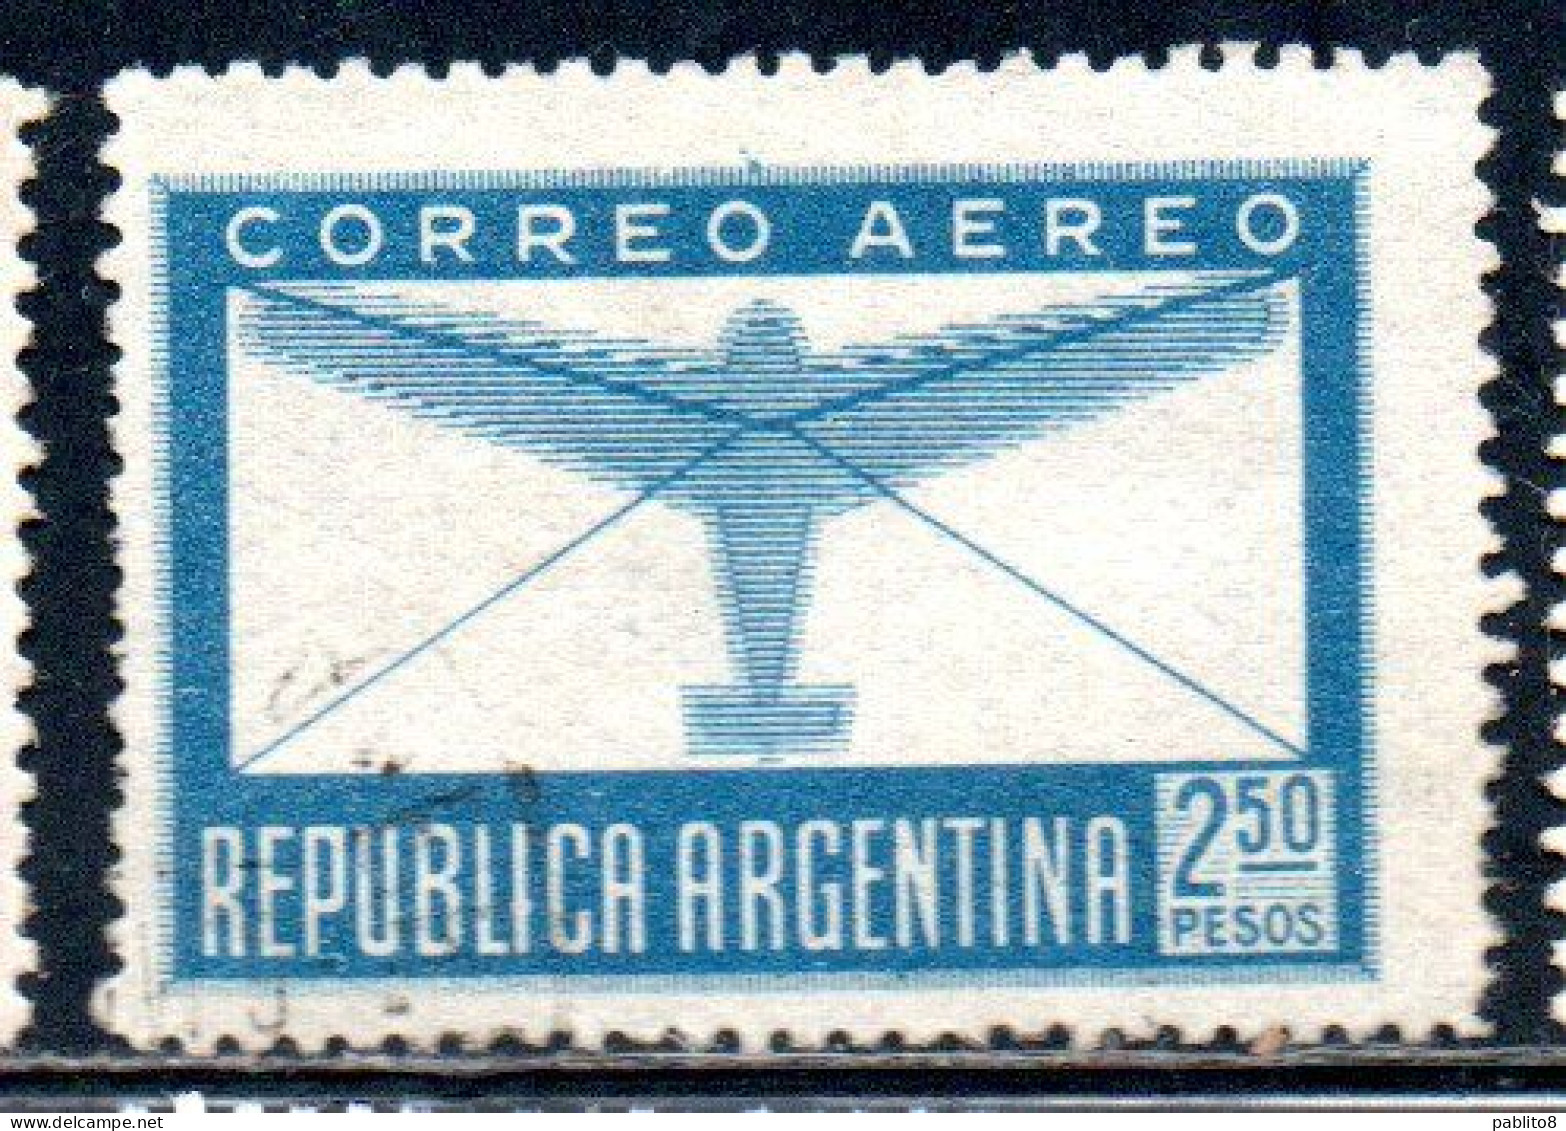 ARGENTINA 1940  AIR POST MAIL CORREO AEREO AIRMAIL PLANE AND LETTER 2.50p USED USADO OBLITERE' - Posta Aerea